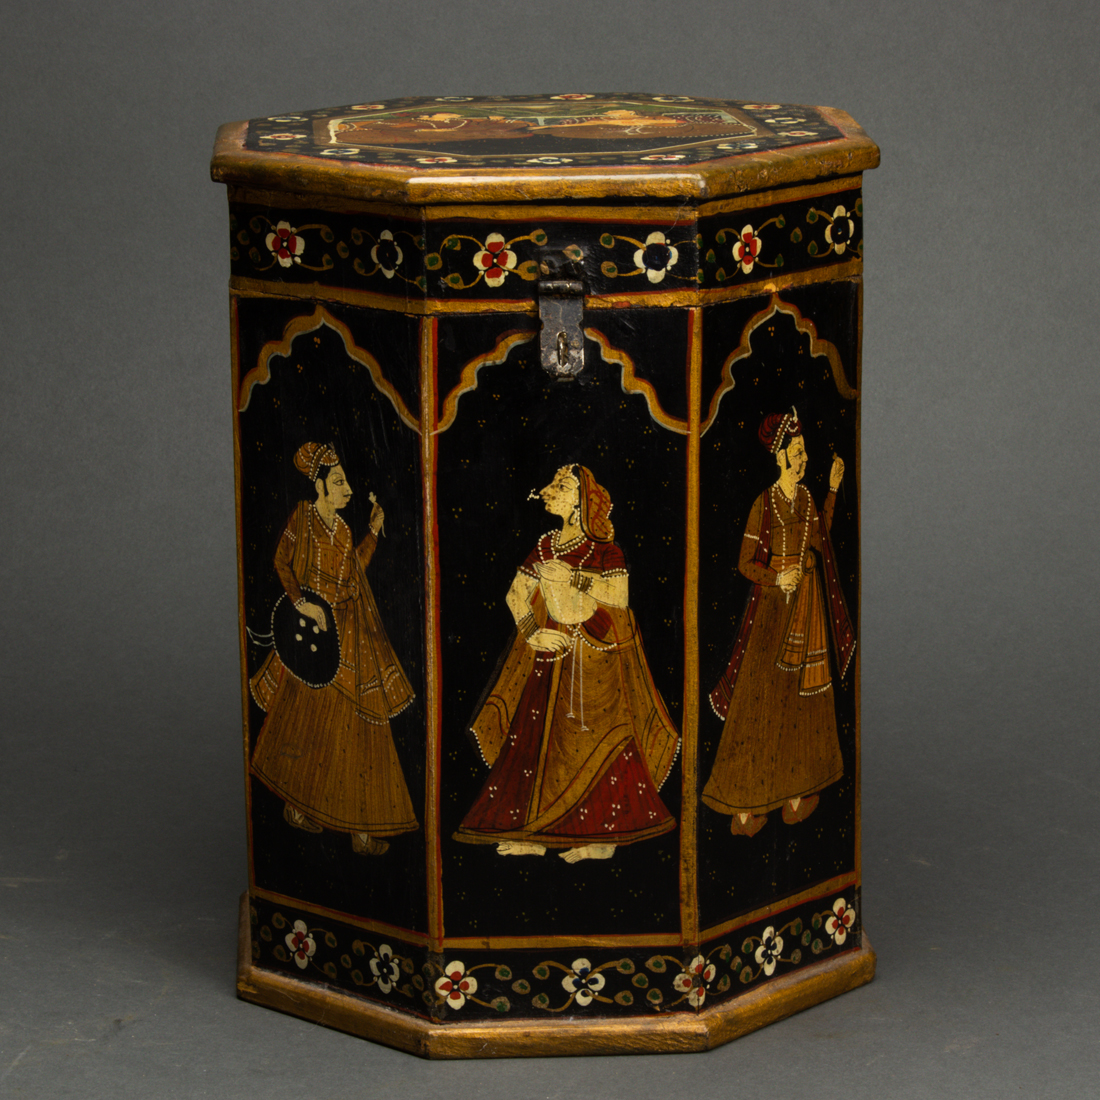 SOUTH ASIAN OCTAGONAL BOX WITH